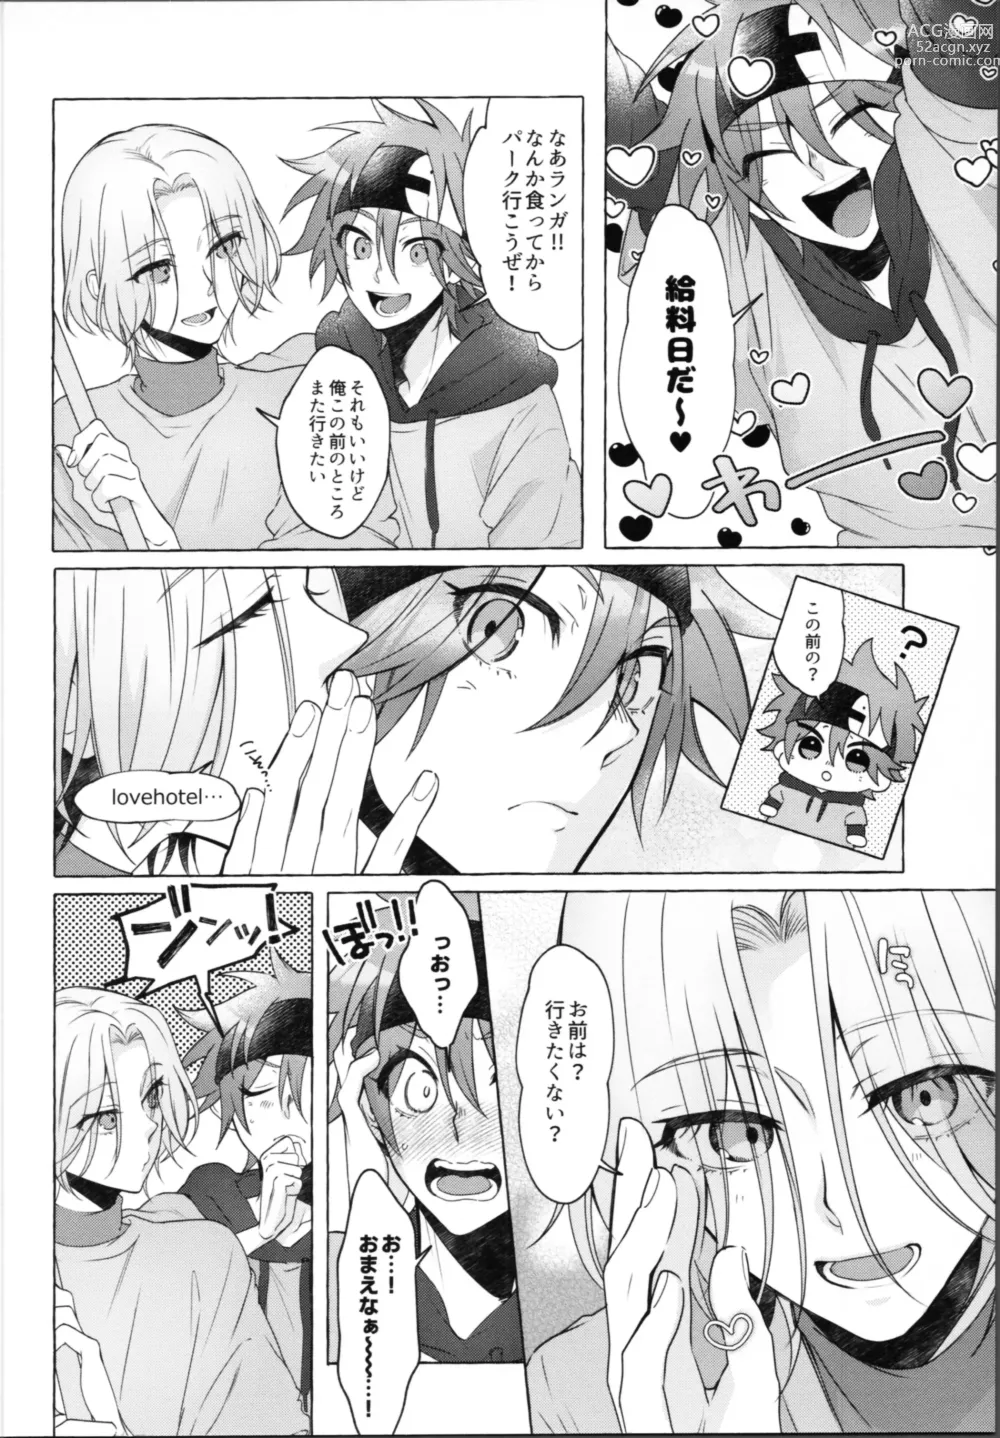 Page 27 of doujinshi Love Hotel tte Donna Toko?